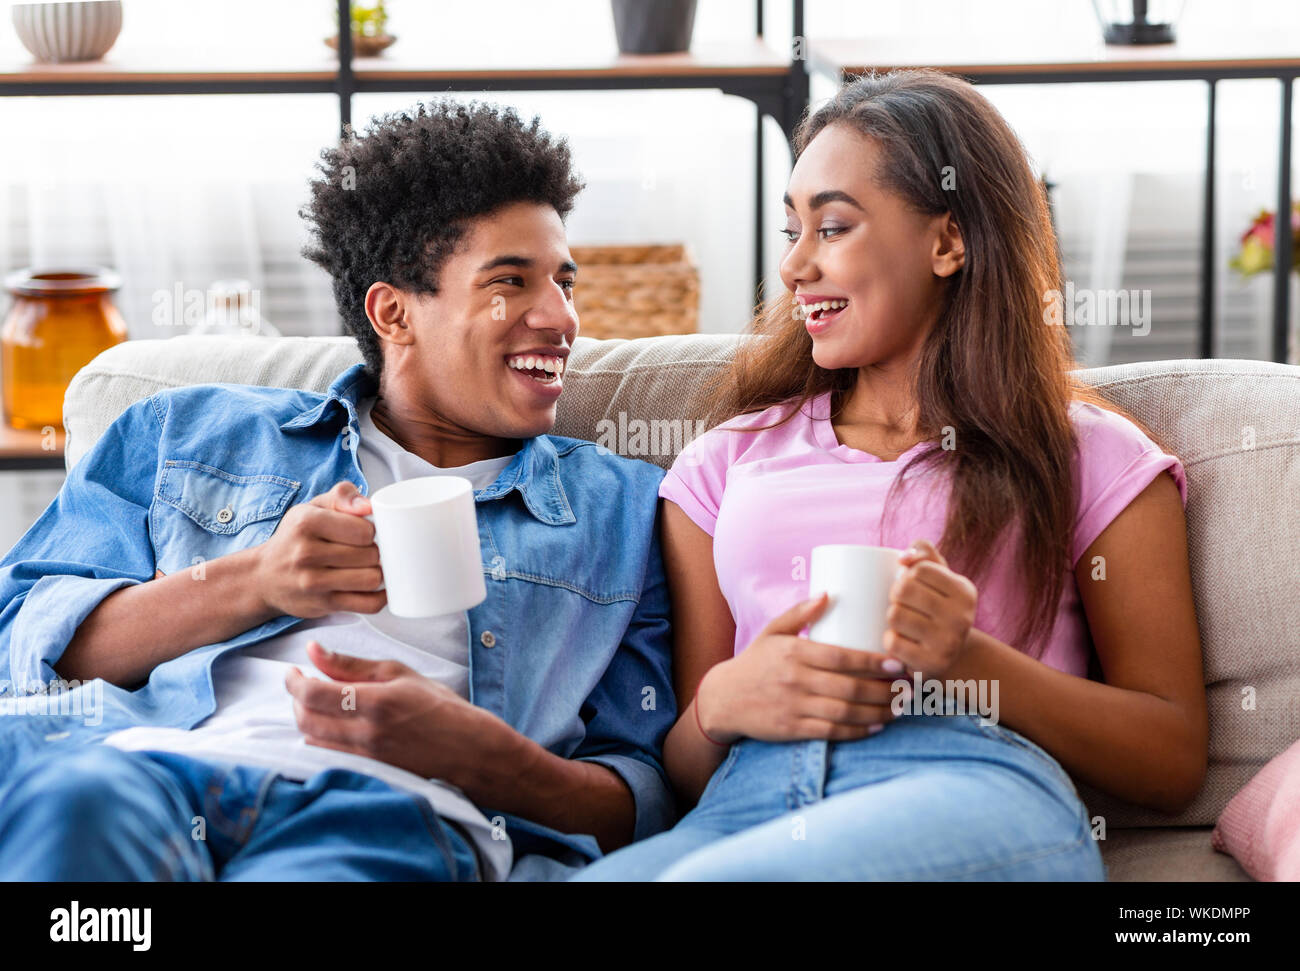 Guy and girl drinking coffee at home relaxing on sofa Stock Photo